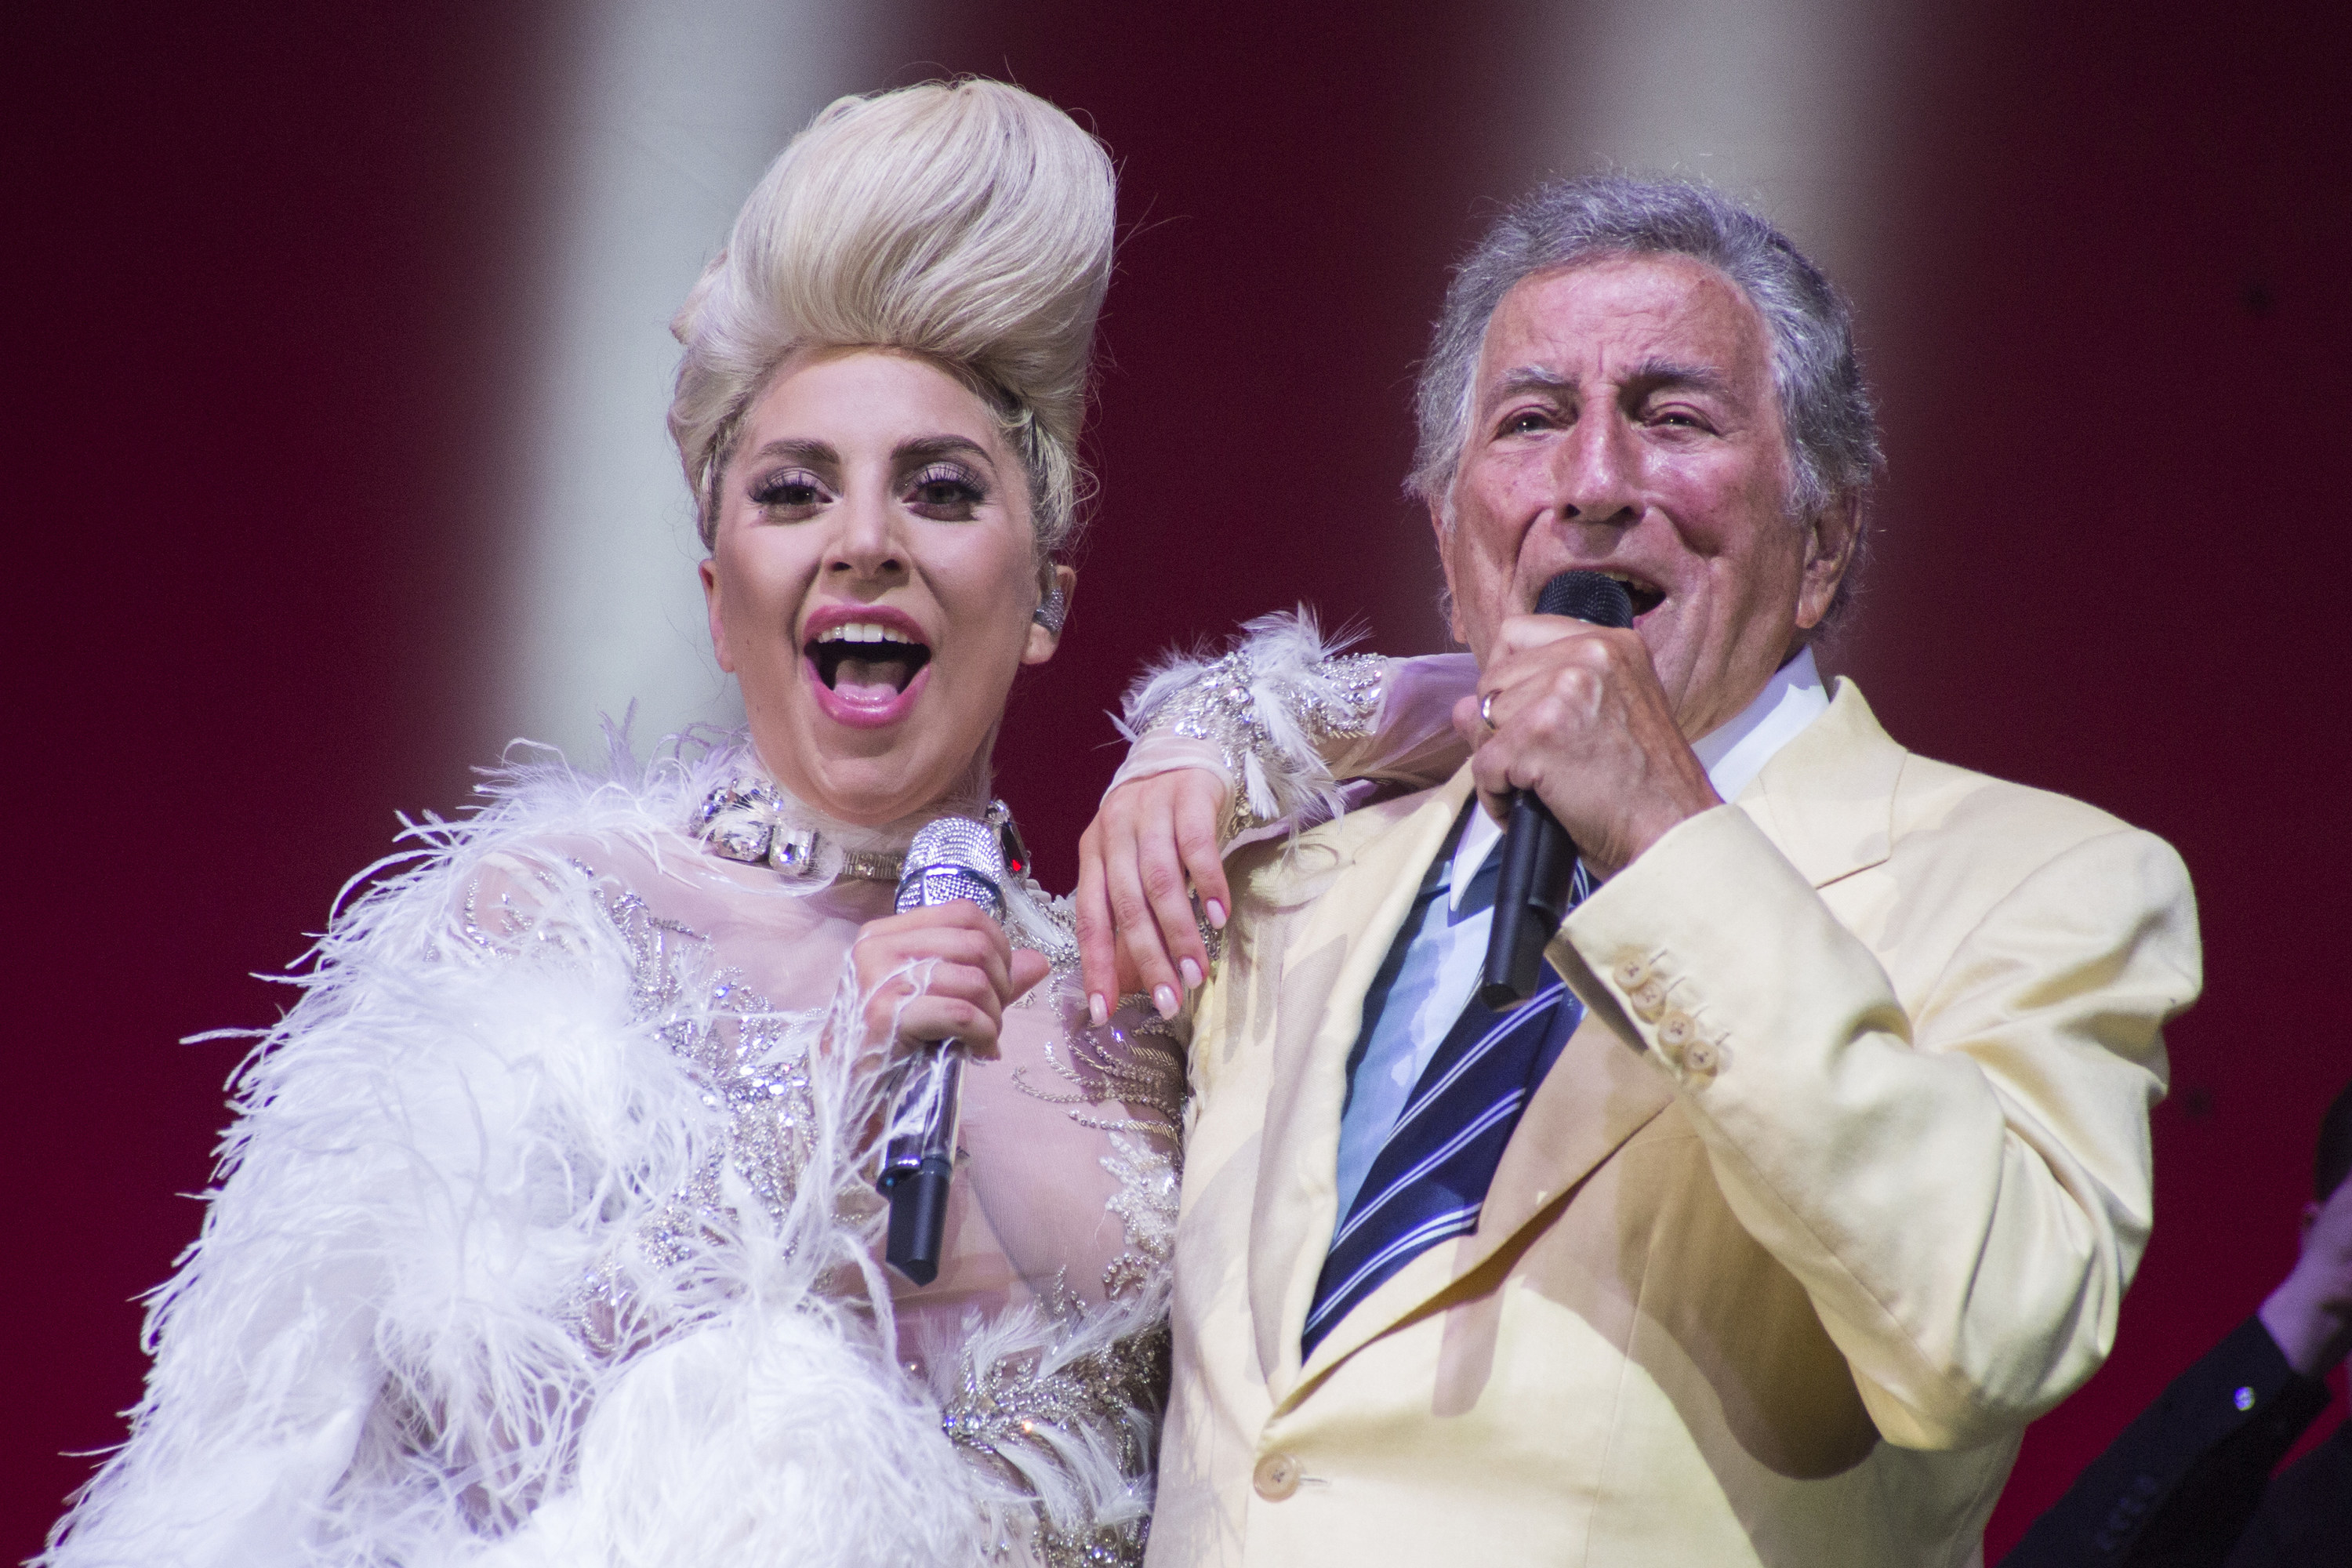 Lady Gaga and Tony performing together on stage